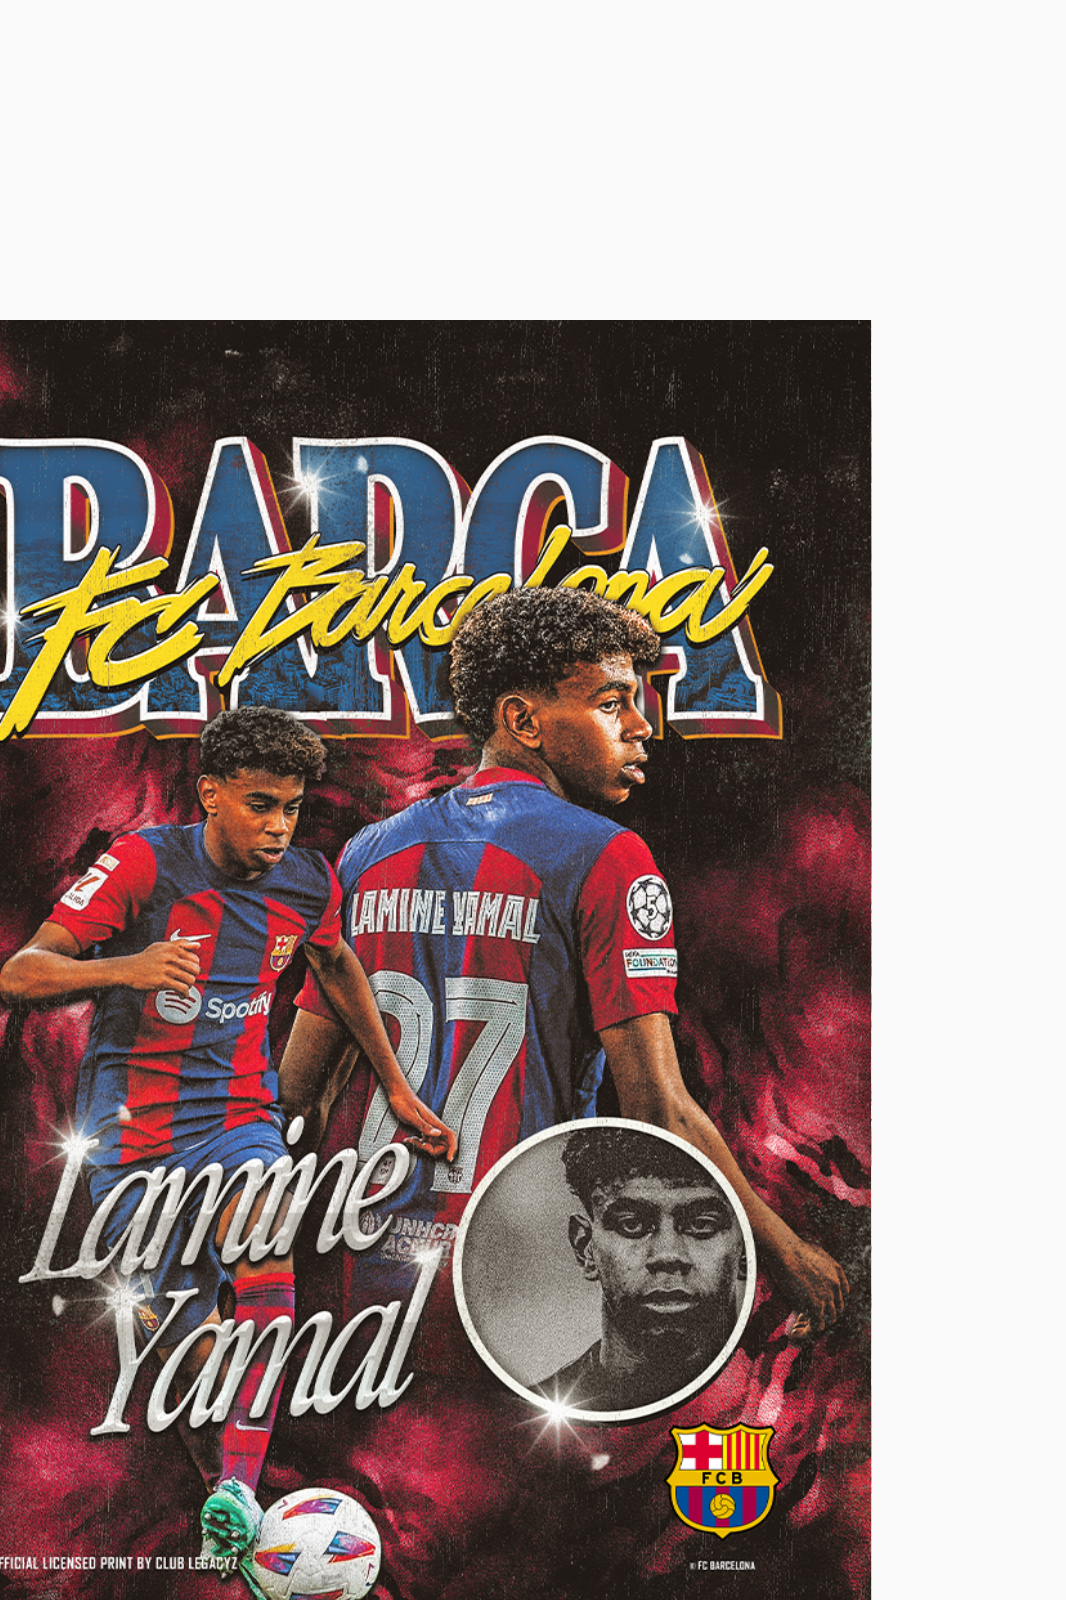 FC Barcelone - Poster Bootleg Lamine Yamal 100 exemplaires